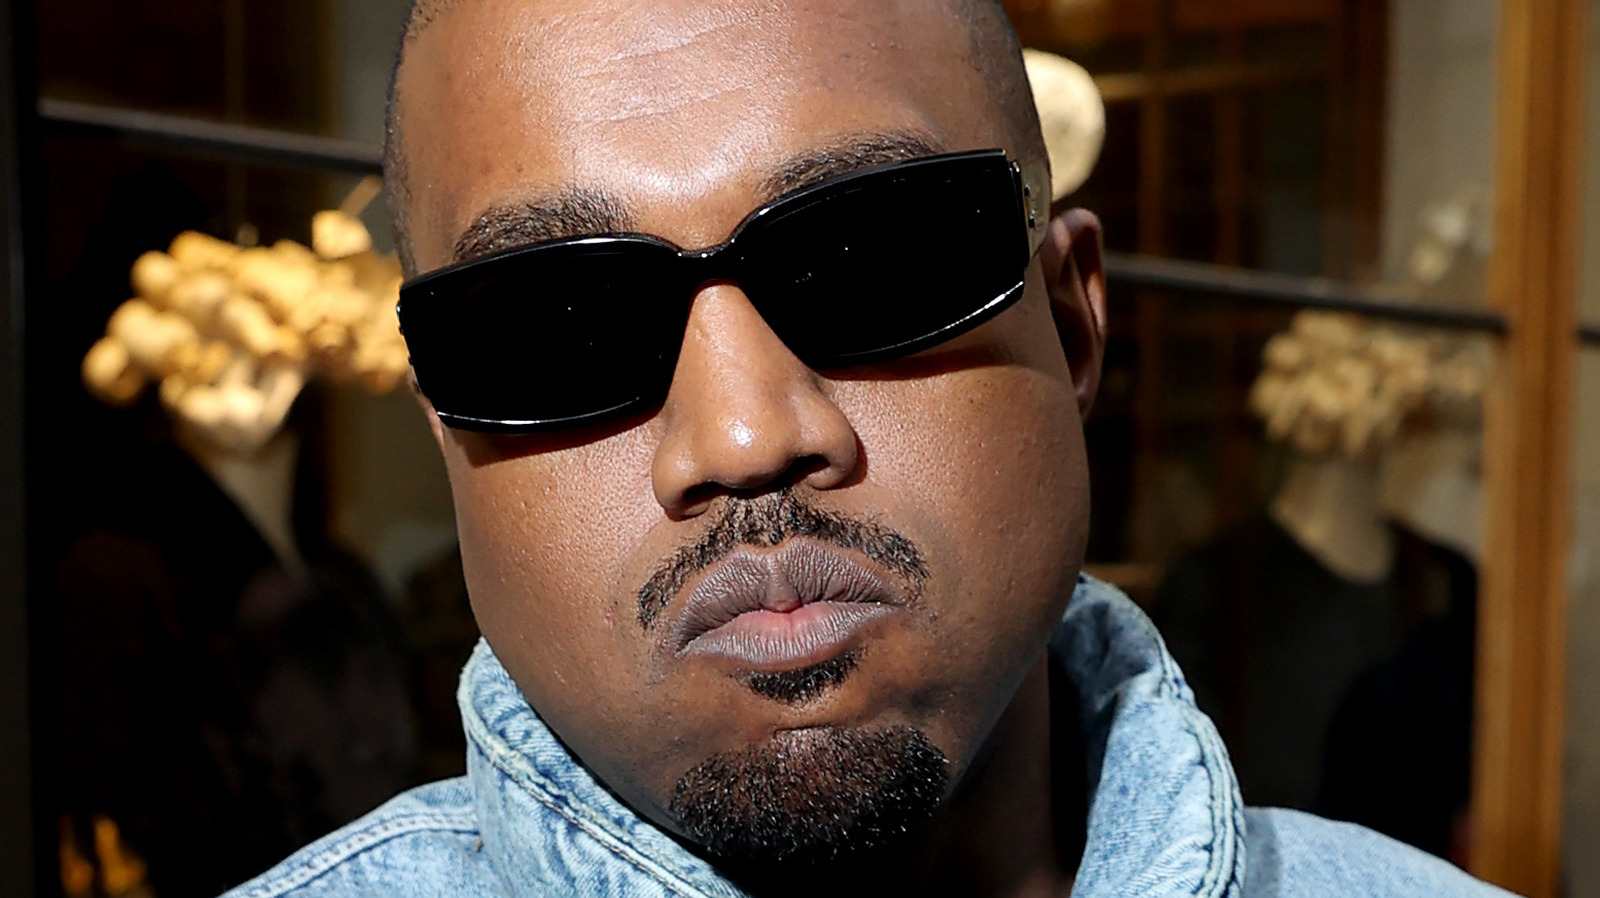 Kanye West's most outrageous fashion claims, Fashion